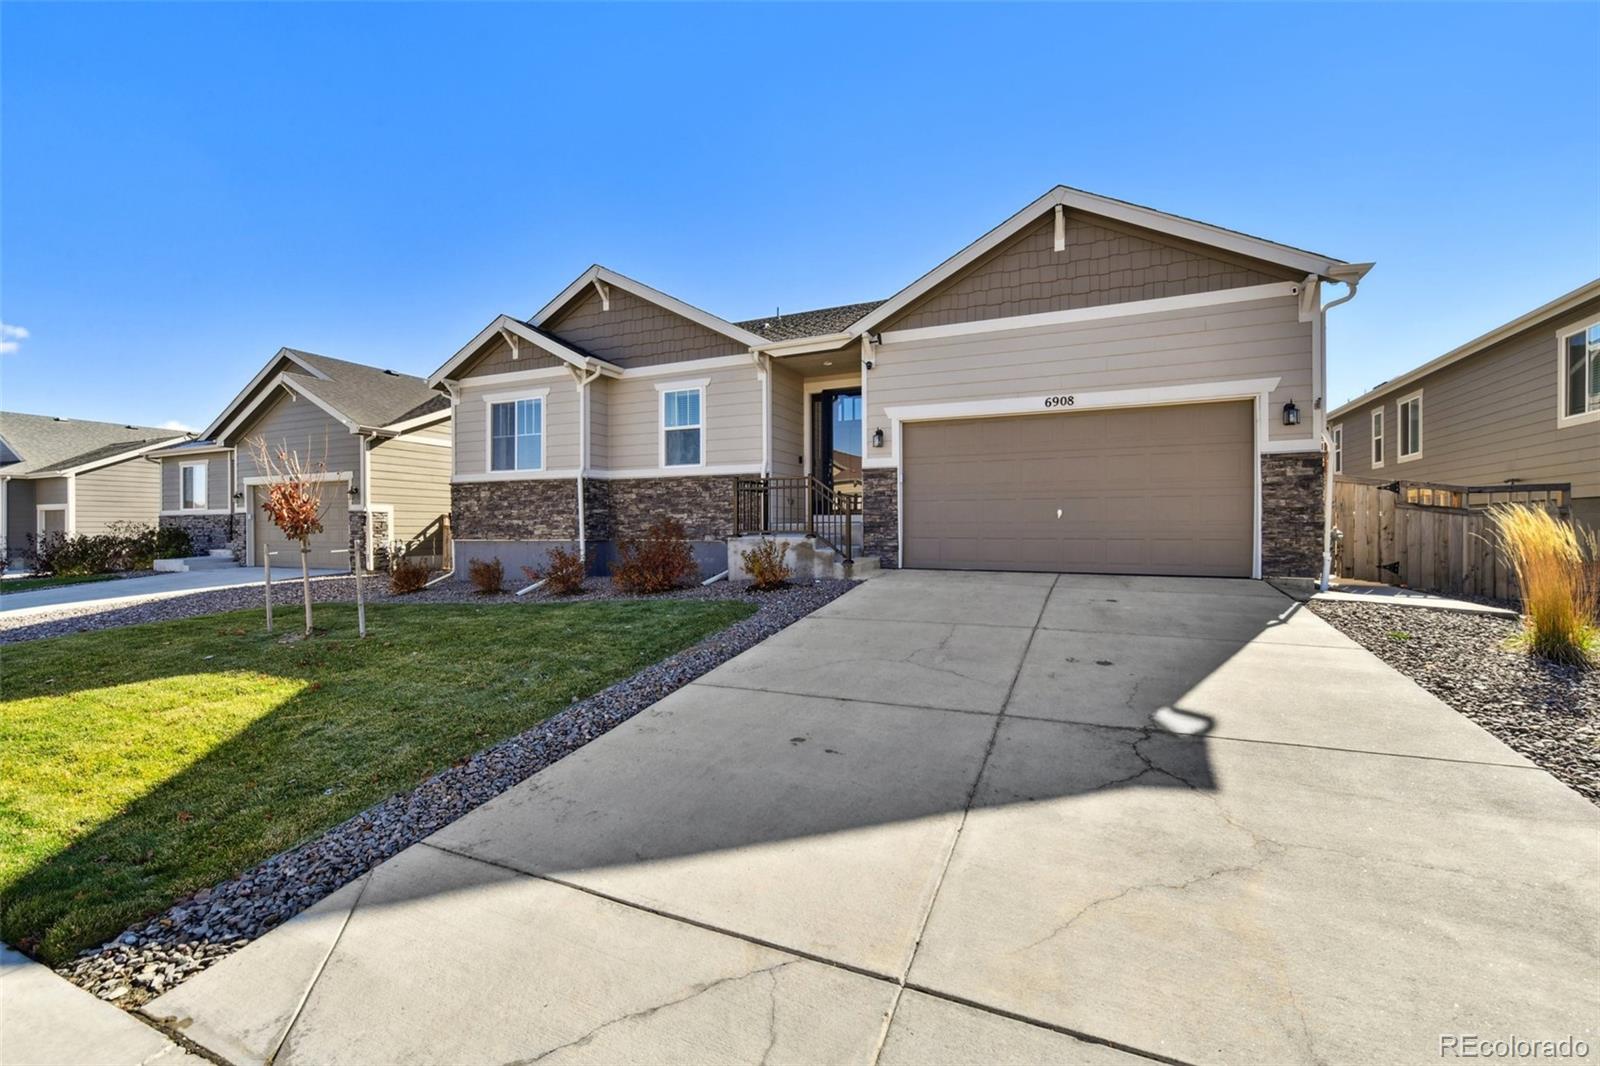 Report Image for 6908  Greenwater Circle,Castle Rock, Colorado